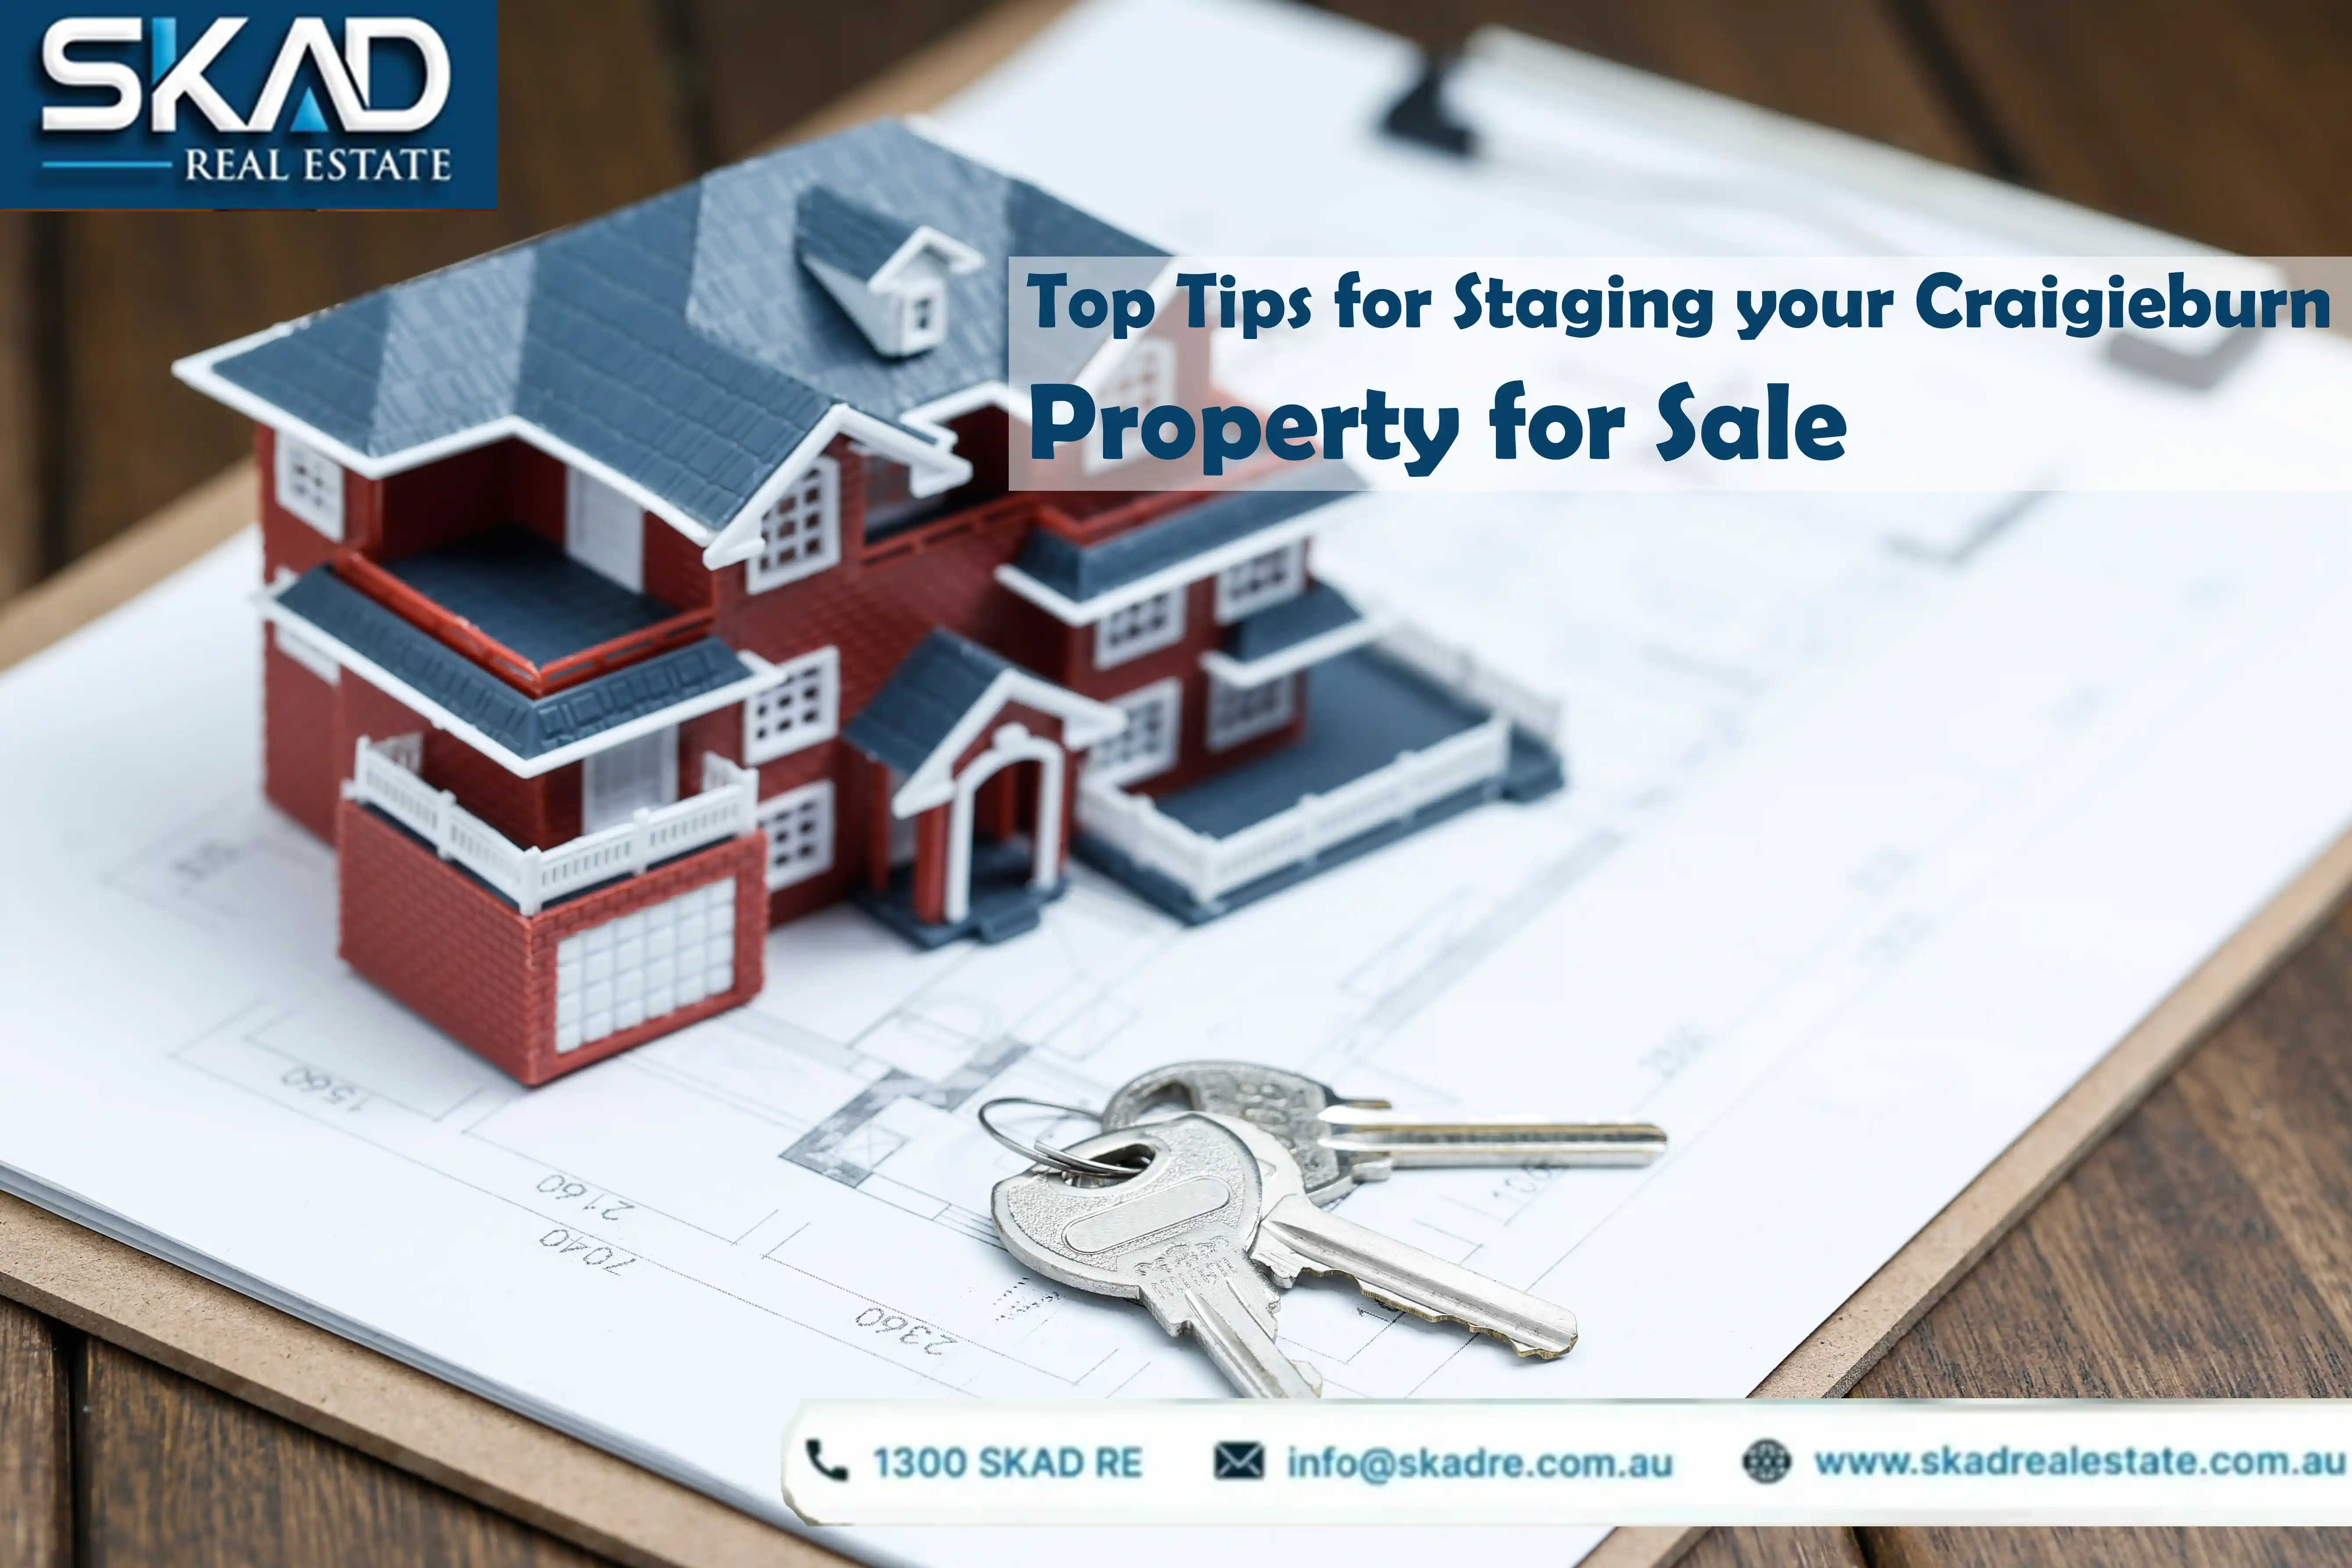 Top Tips for Staging your Craigieburn Property for Sale